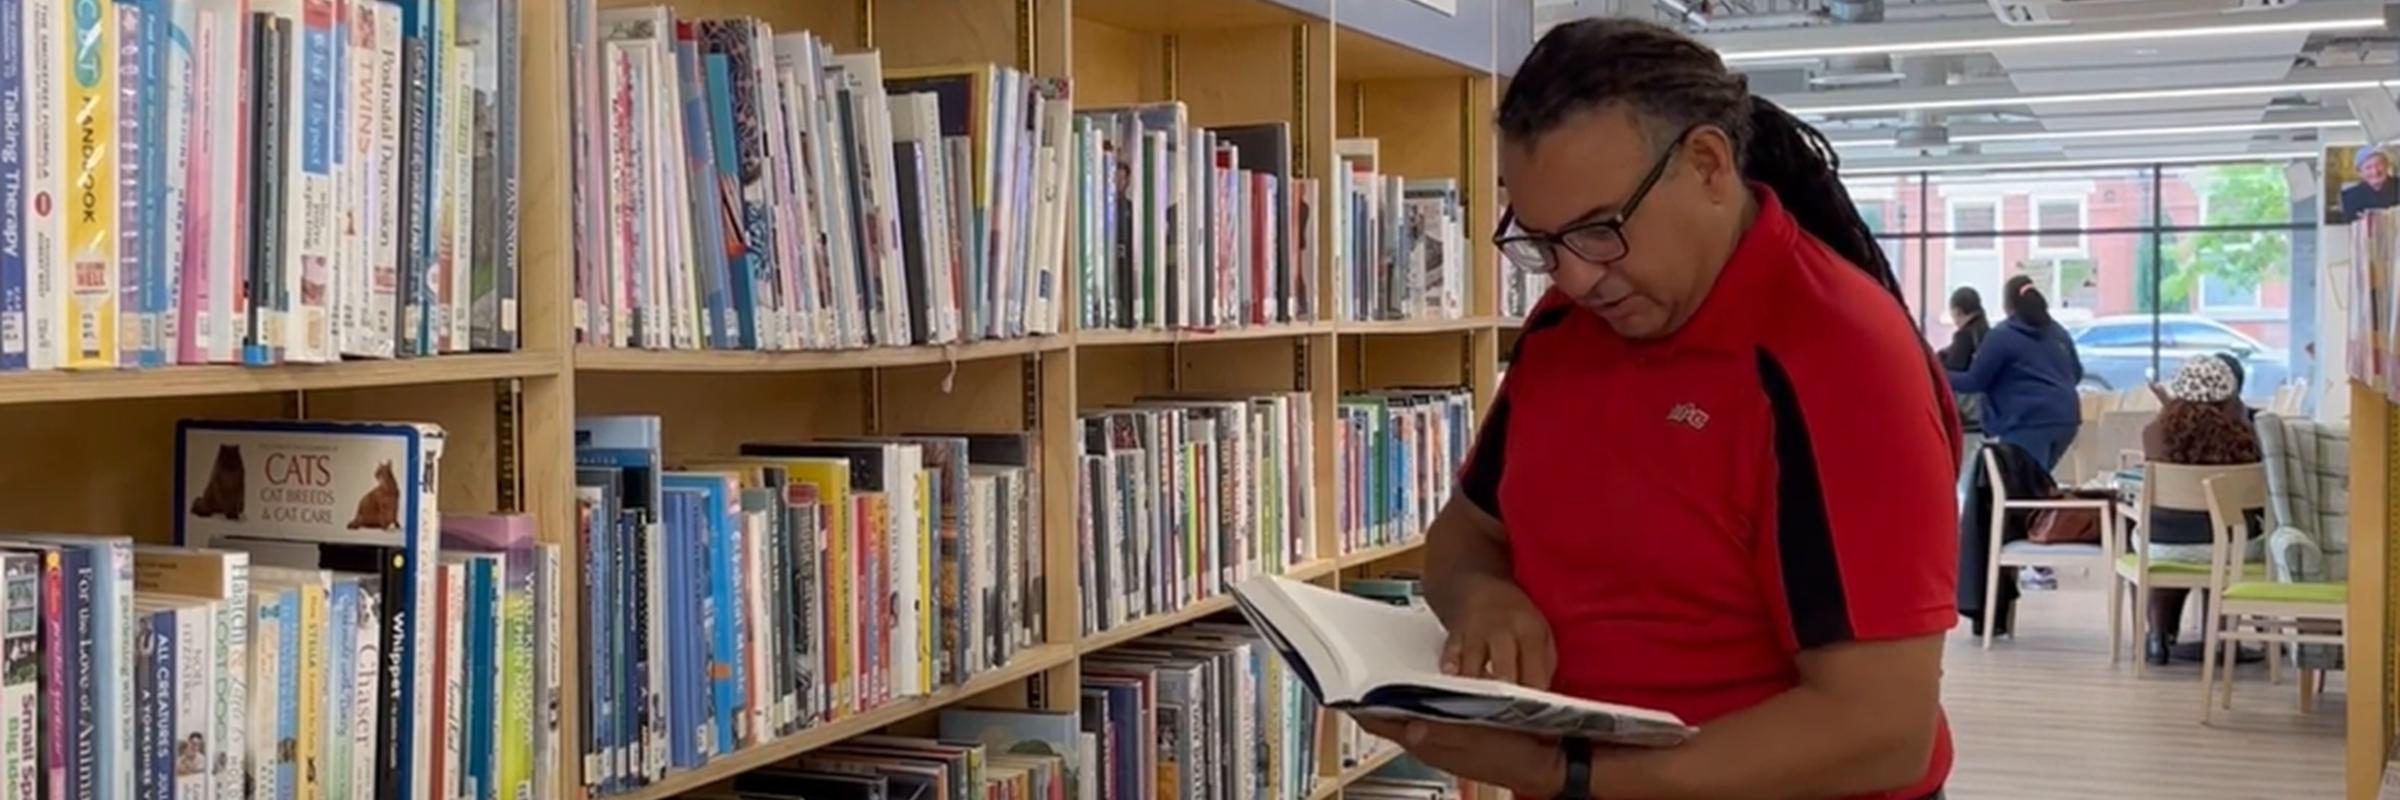 A person with long hair and glasses reading a book from a library.